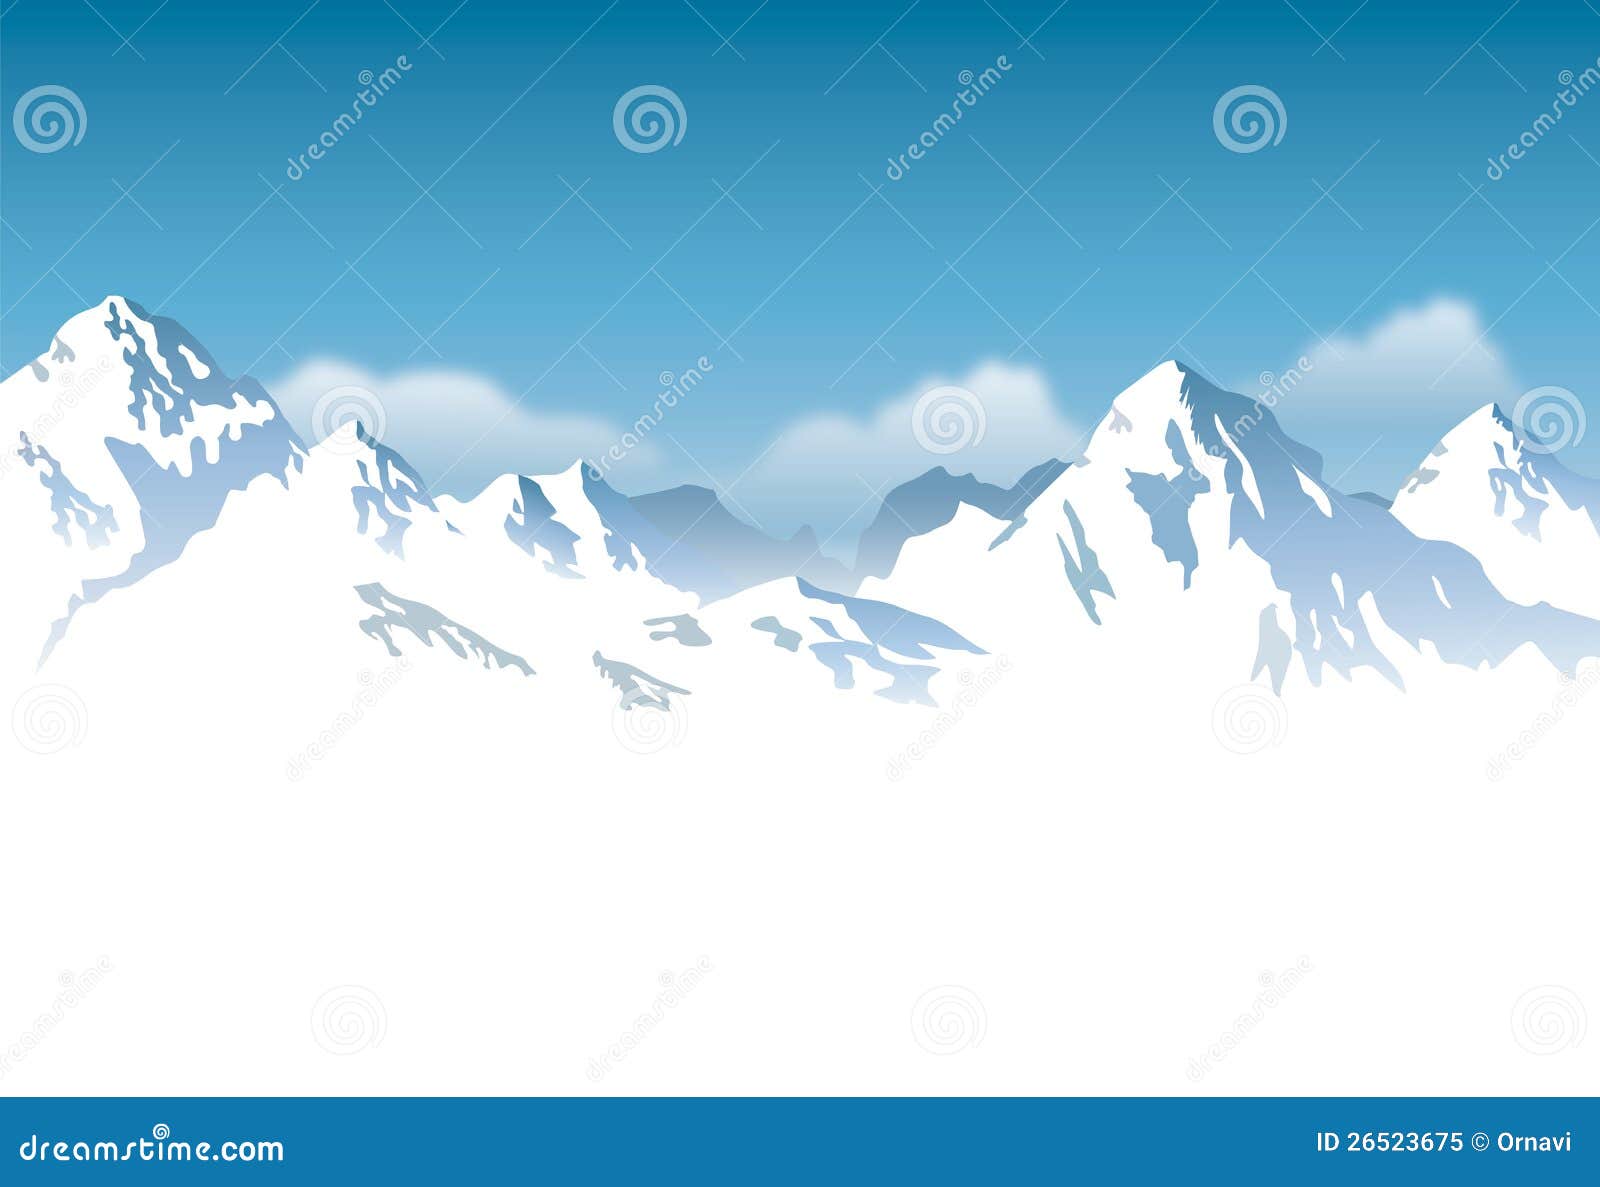 snow capped mountains clipart - photo #22